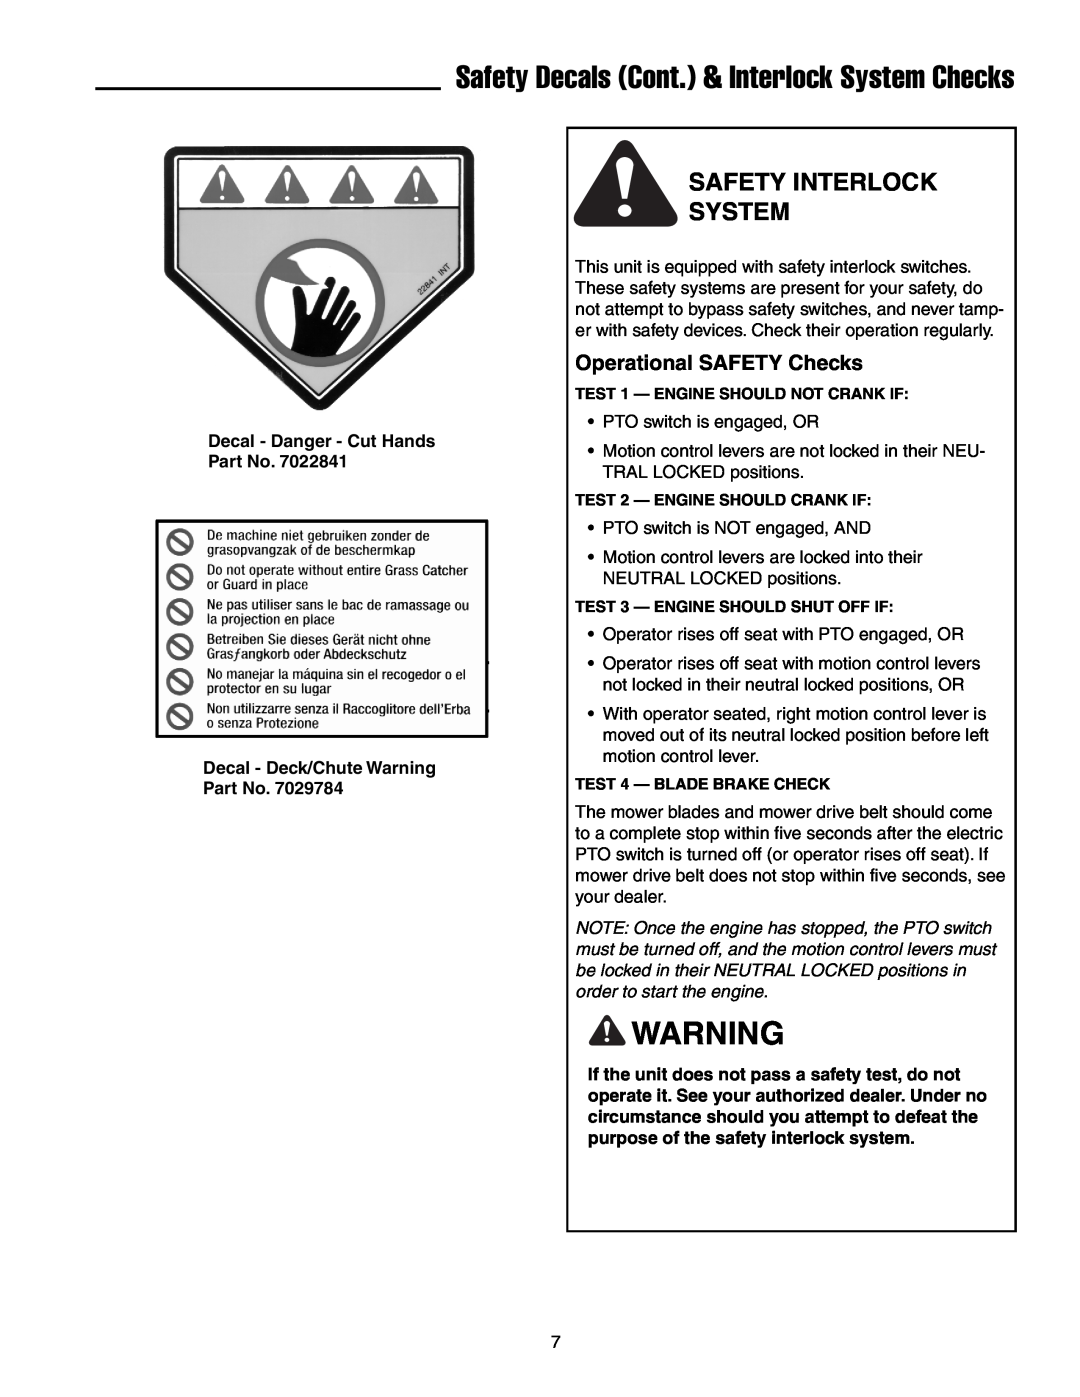 Simplicity 250 Z manual Safety Decals Cont. & Interlock System Checks, Safety Interlock System 